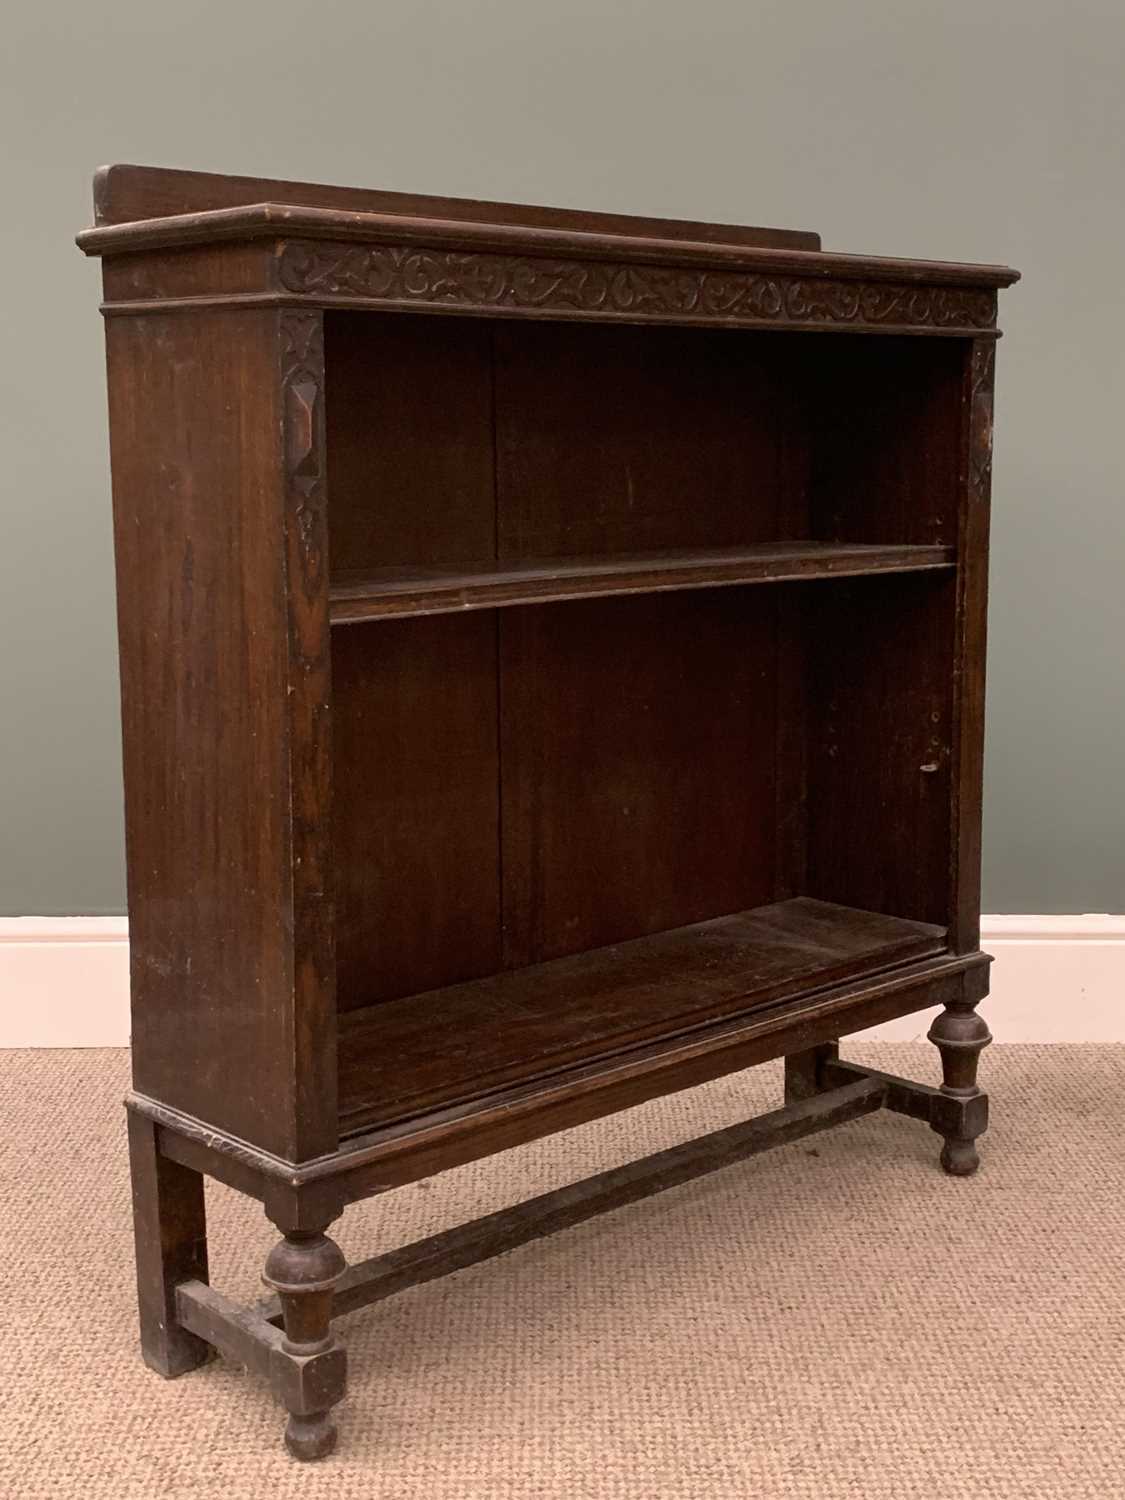 EDWARDIAN CARVED OAK OPEN BOOKCASE, 101 (h) x 91 (w) x 26 (d) cms Provenance: Private collection - Image 2 of 3